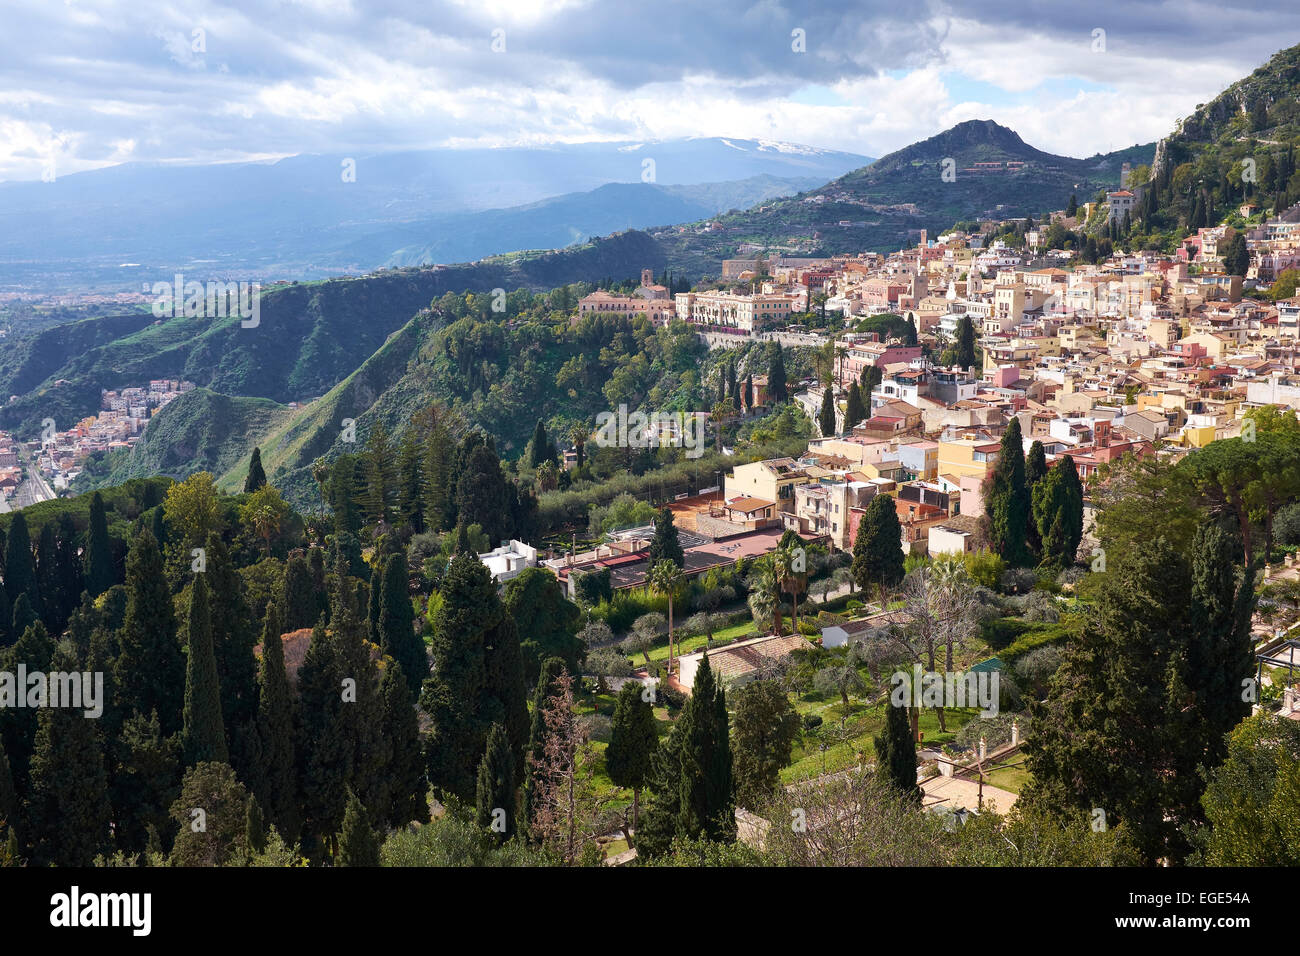 Taormina with Mount Etna in the distance, Sicily, Italy. Italian Tourism, Travel and Holiday Destination. Stock Photo